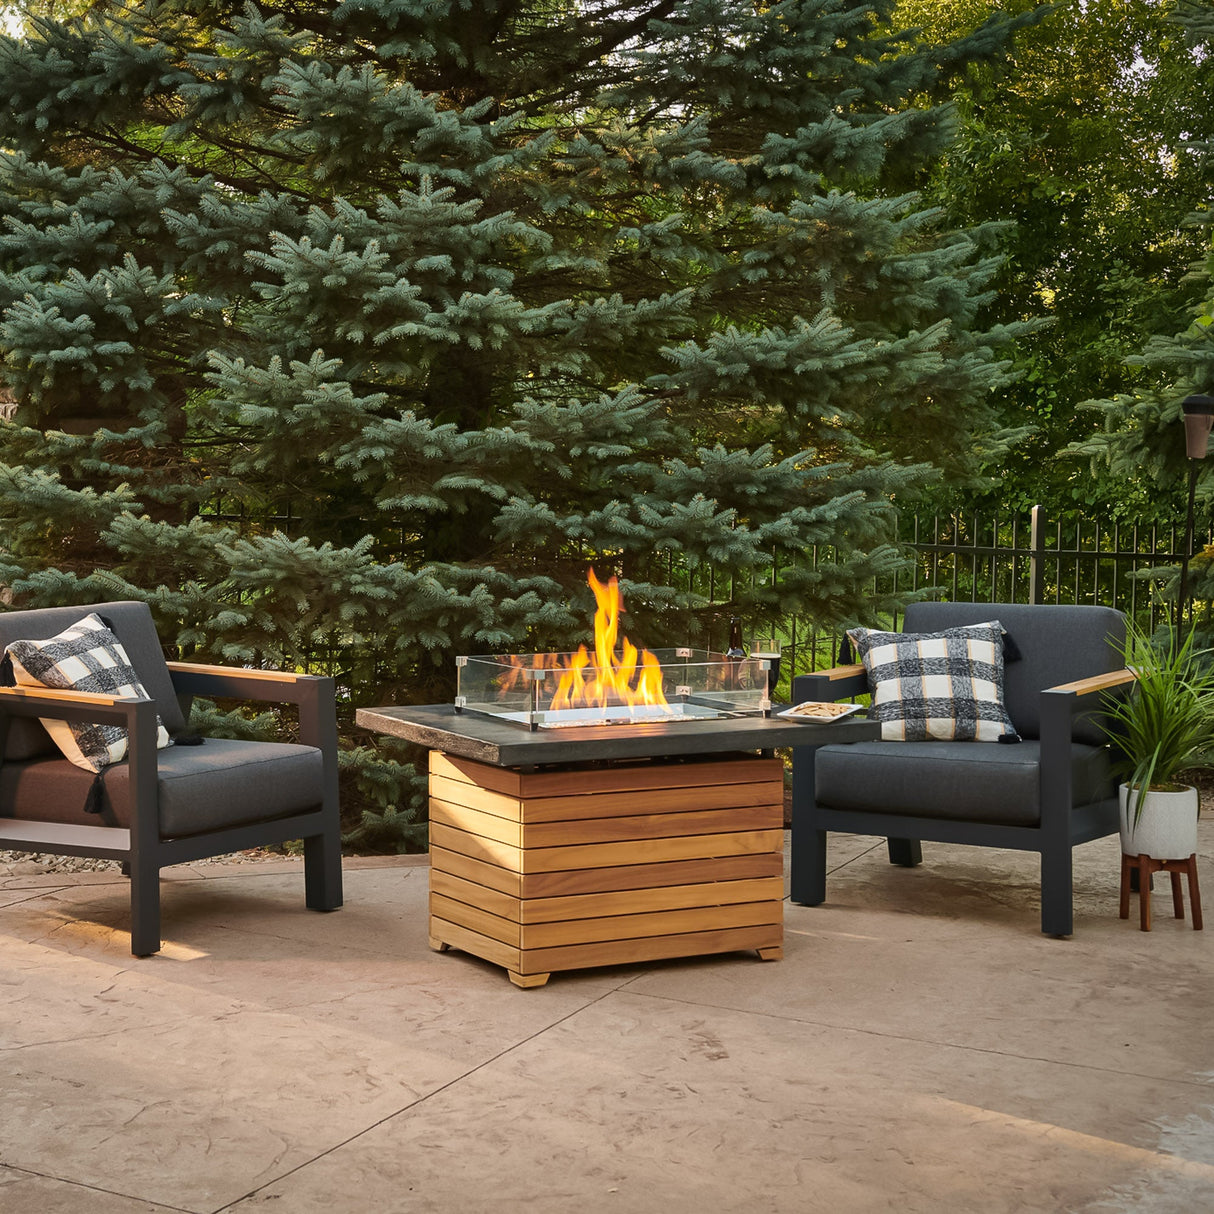 The Darien Rectangular Gas Fire Pit Table with an Everblend top and a glass wind guard next to patio furniture and a large pine tree